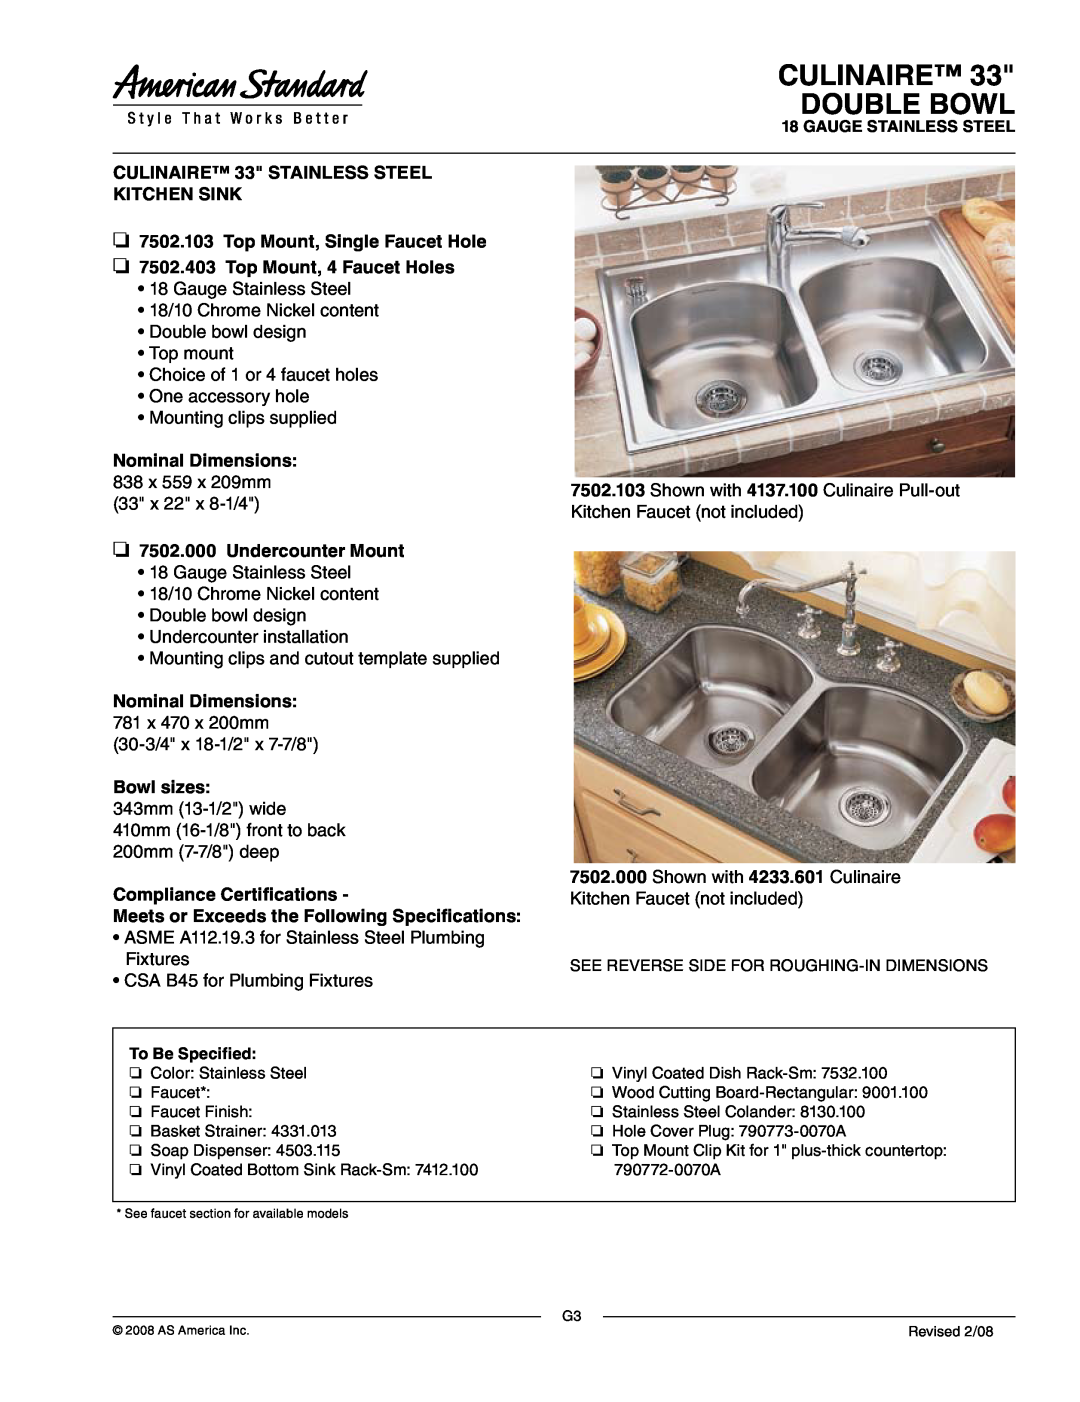 American Standard ASME A112.19.3 dimensions Culinaire Double Bowl, CULINAIRE 33 STAINLESS STEEL KITCHEN SINK, Bowl sizes 